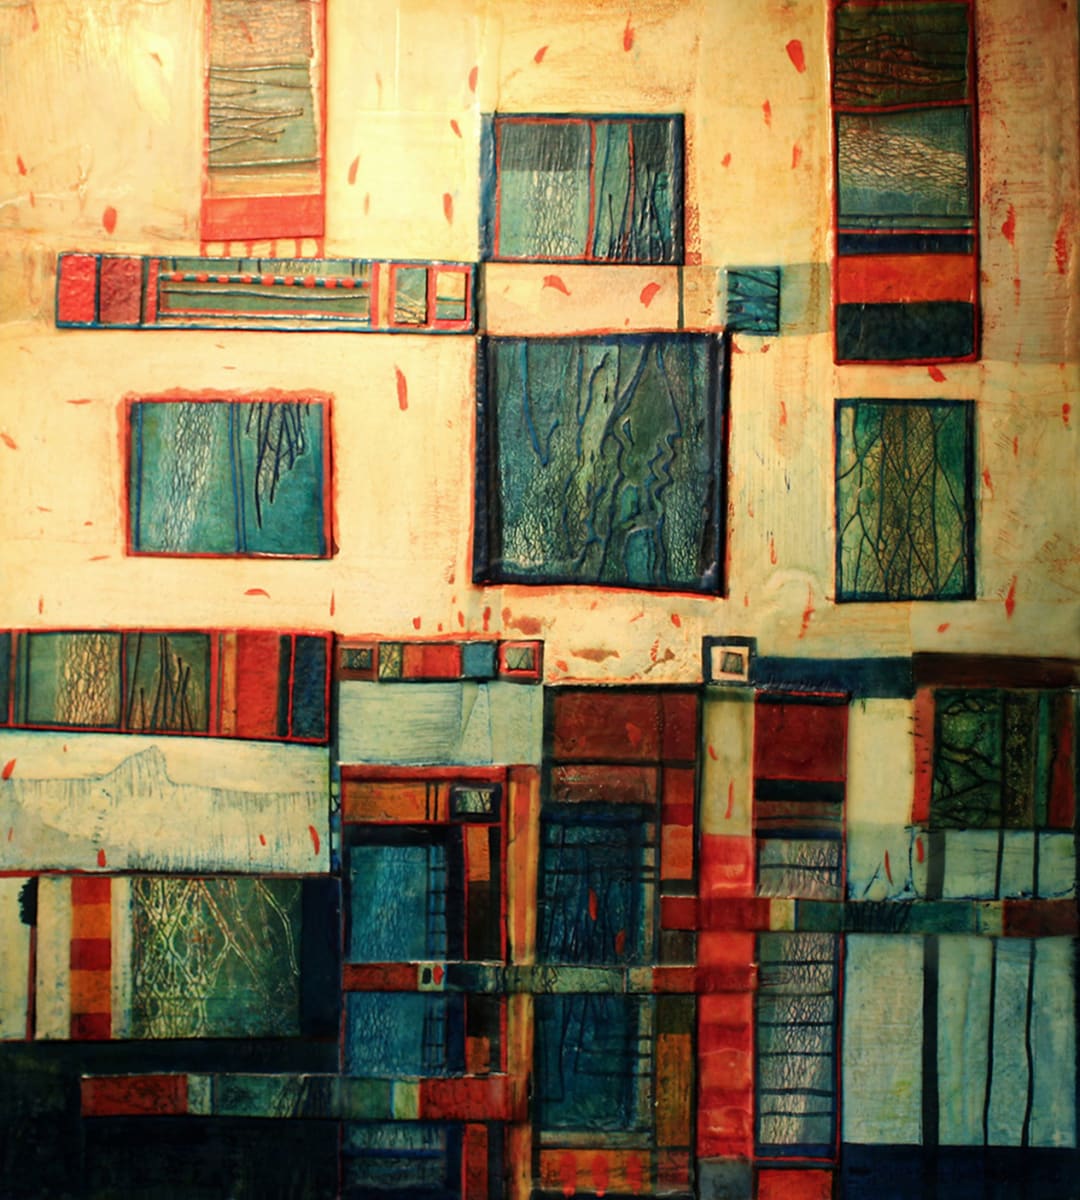 Space City by Brenda Hartill  Image: Encaustic painting